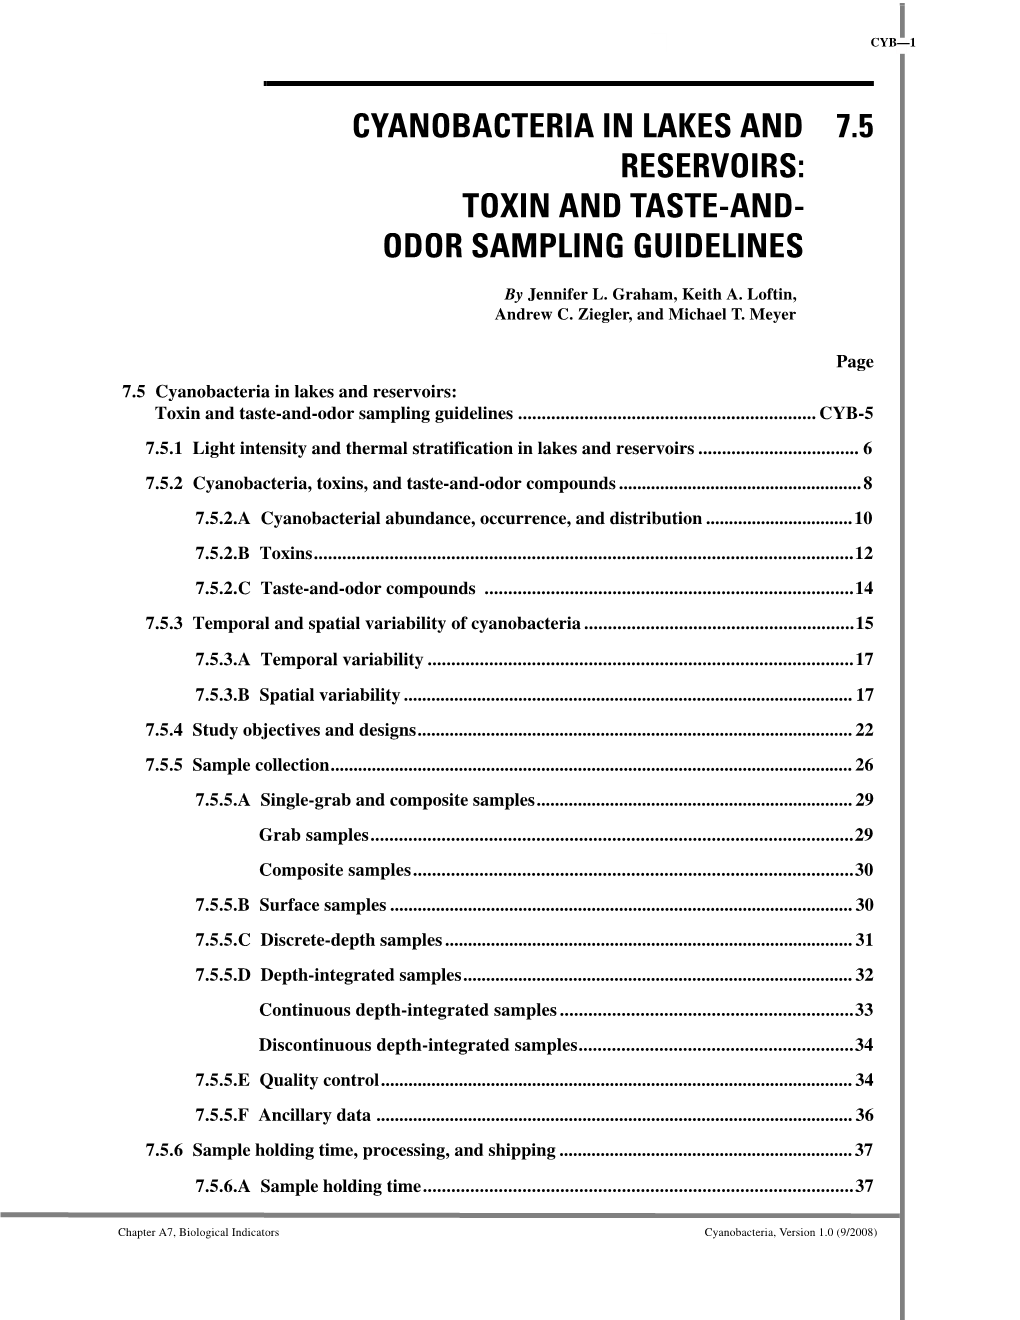 Cyanobacteria in Lakes and Reservoirs: Toxin and Taste-And-Odor Sampling Guidelines